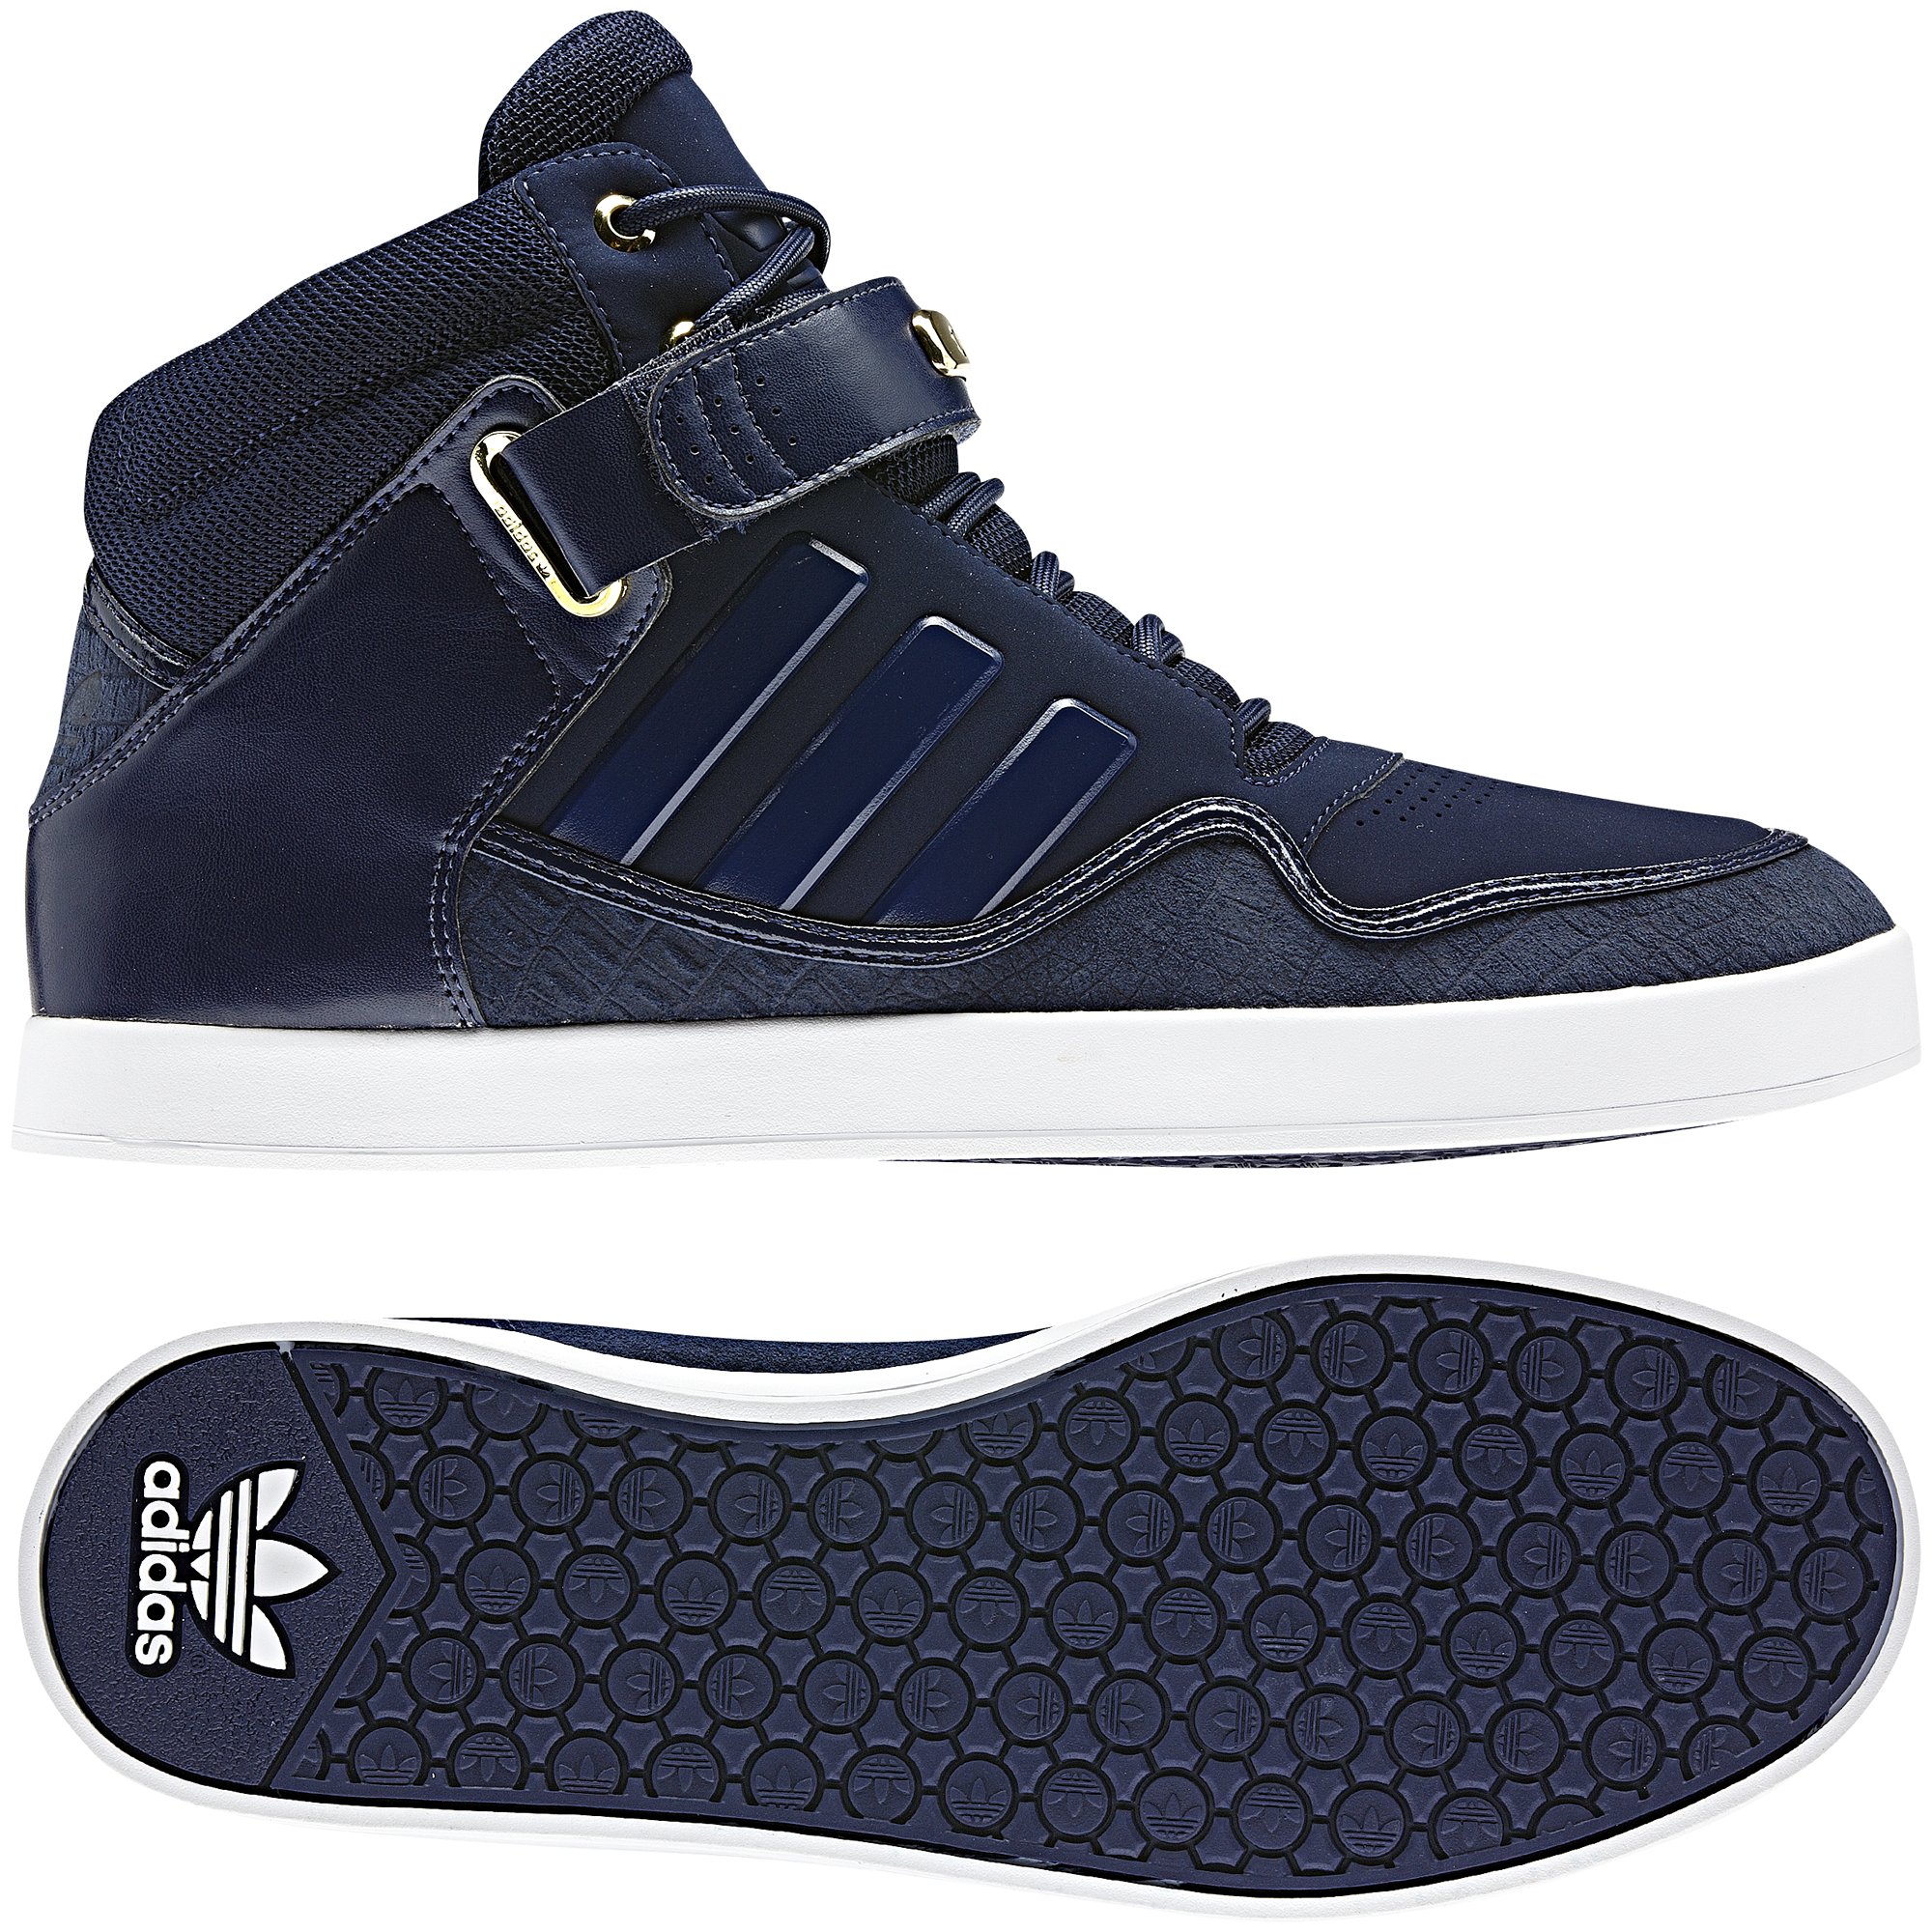 Chaussures Homme Adidas - Adidas Hommes Chaussures AR 2